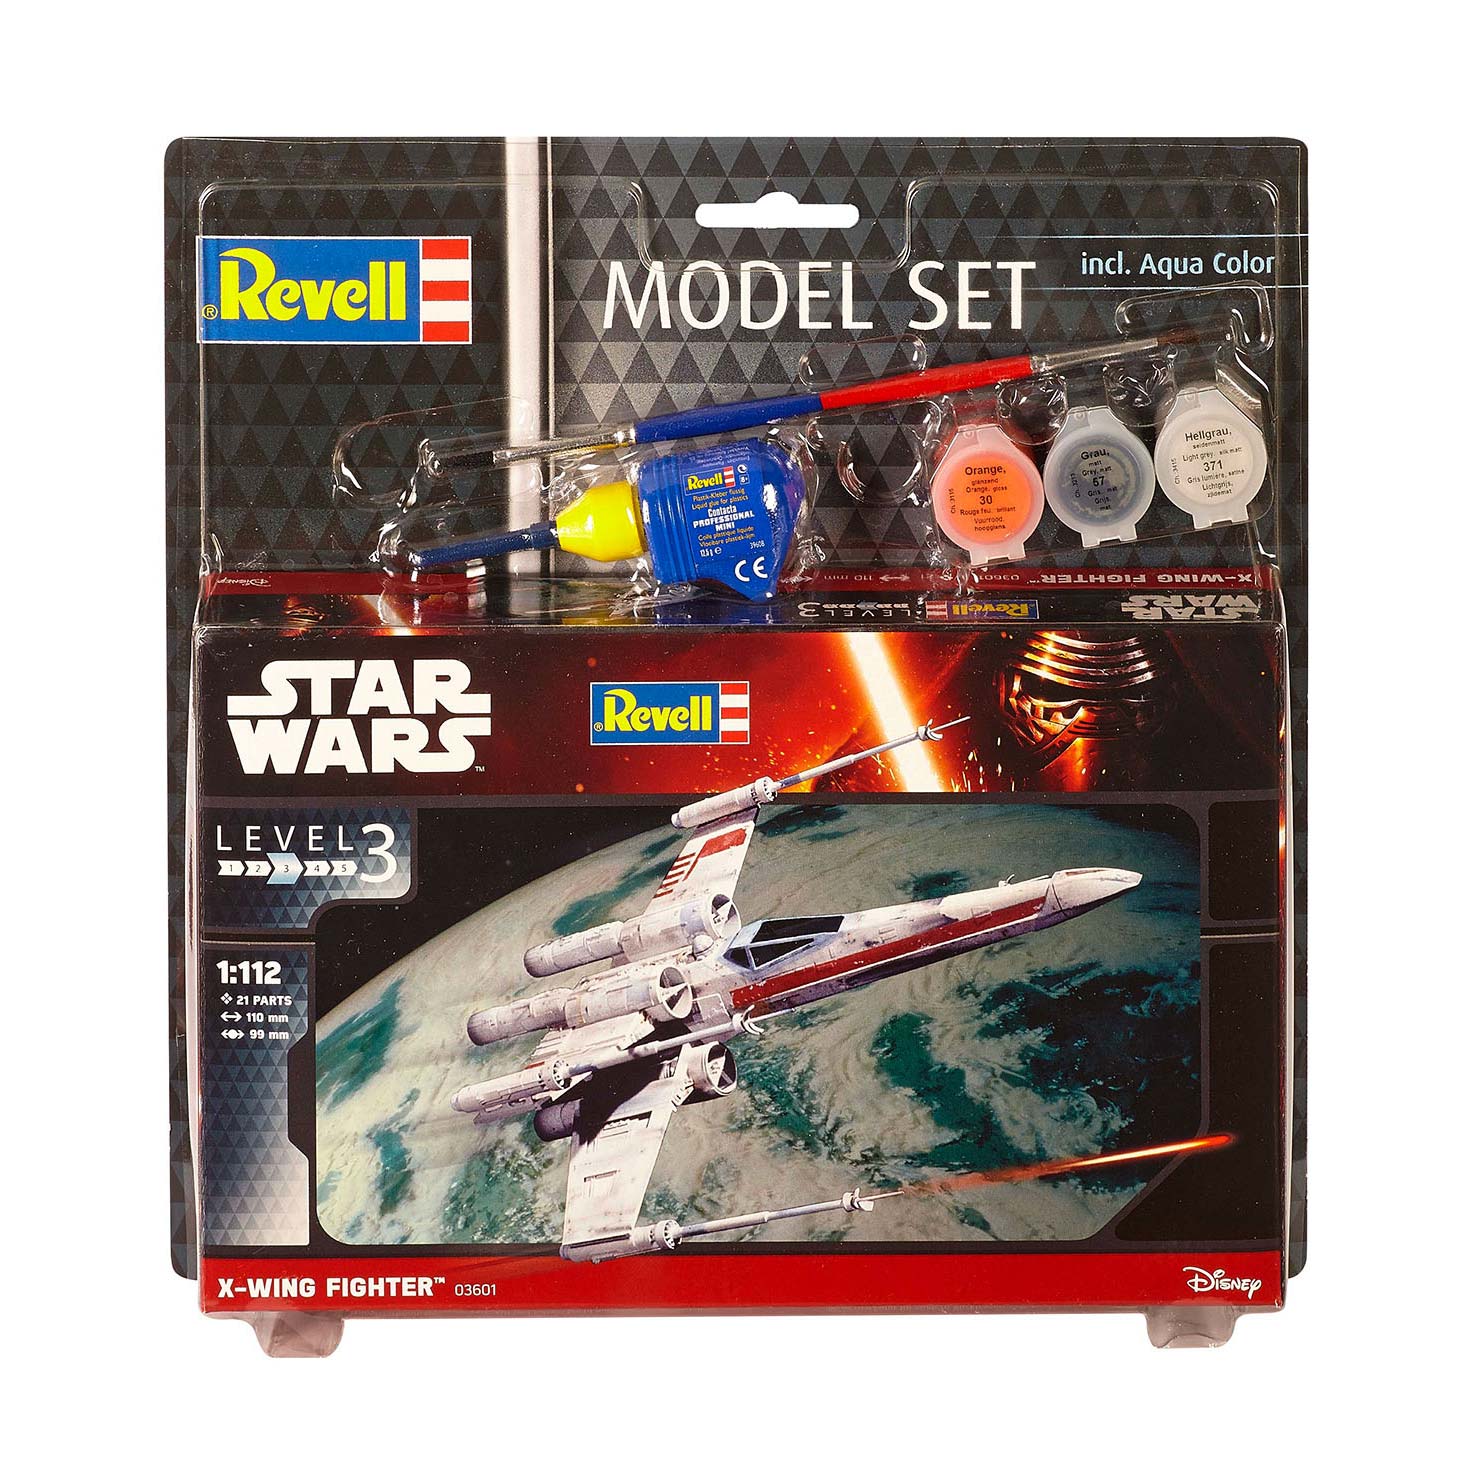 REVELL STAR WARS LEVEL 3 X-WING FIGHTER